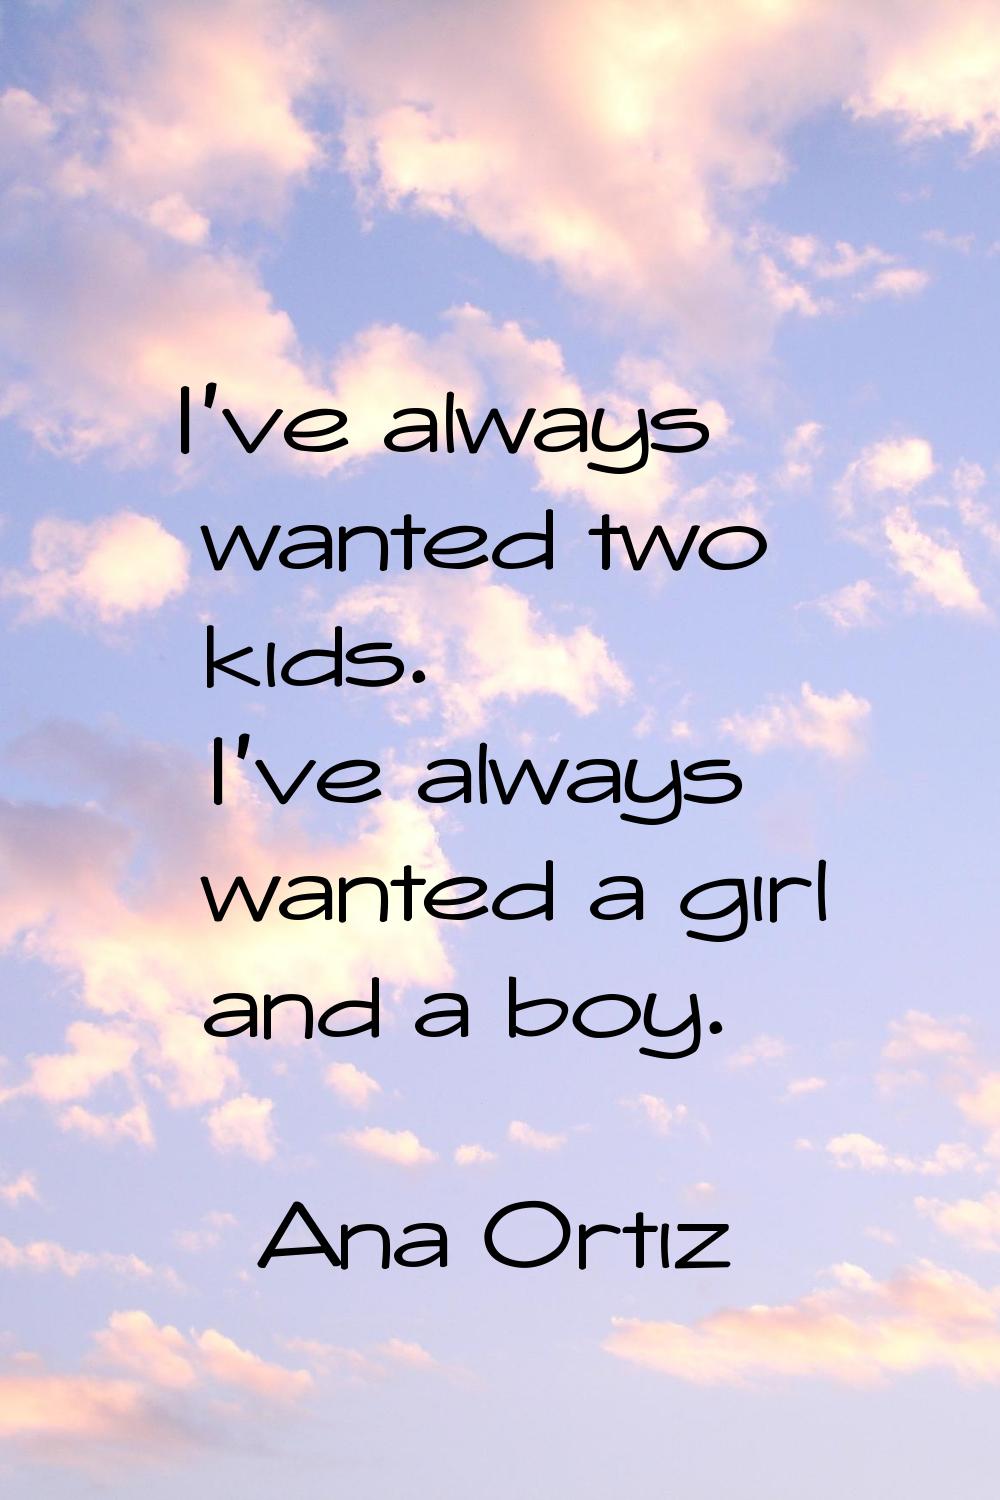 I've always wanted two kids. I've always wanted a girl and a boy.